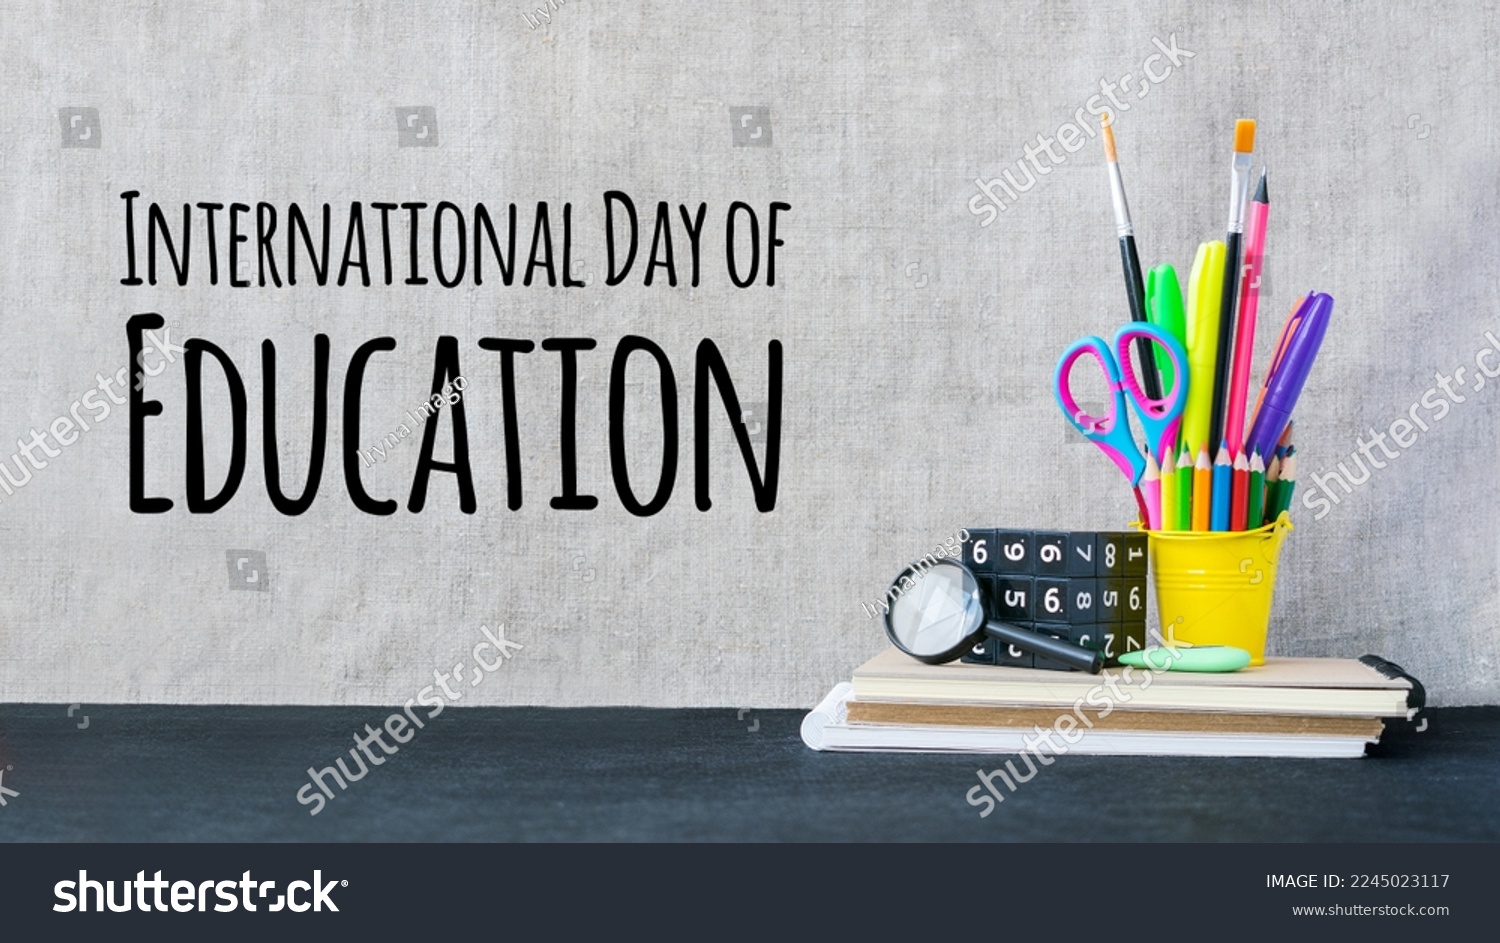 International Day of Education concept with color school supplies on desk. International Education Day, 24 January greeting card. #2245023117